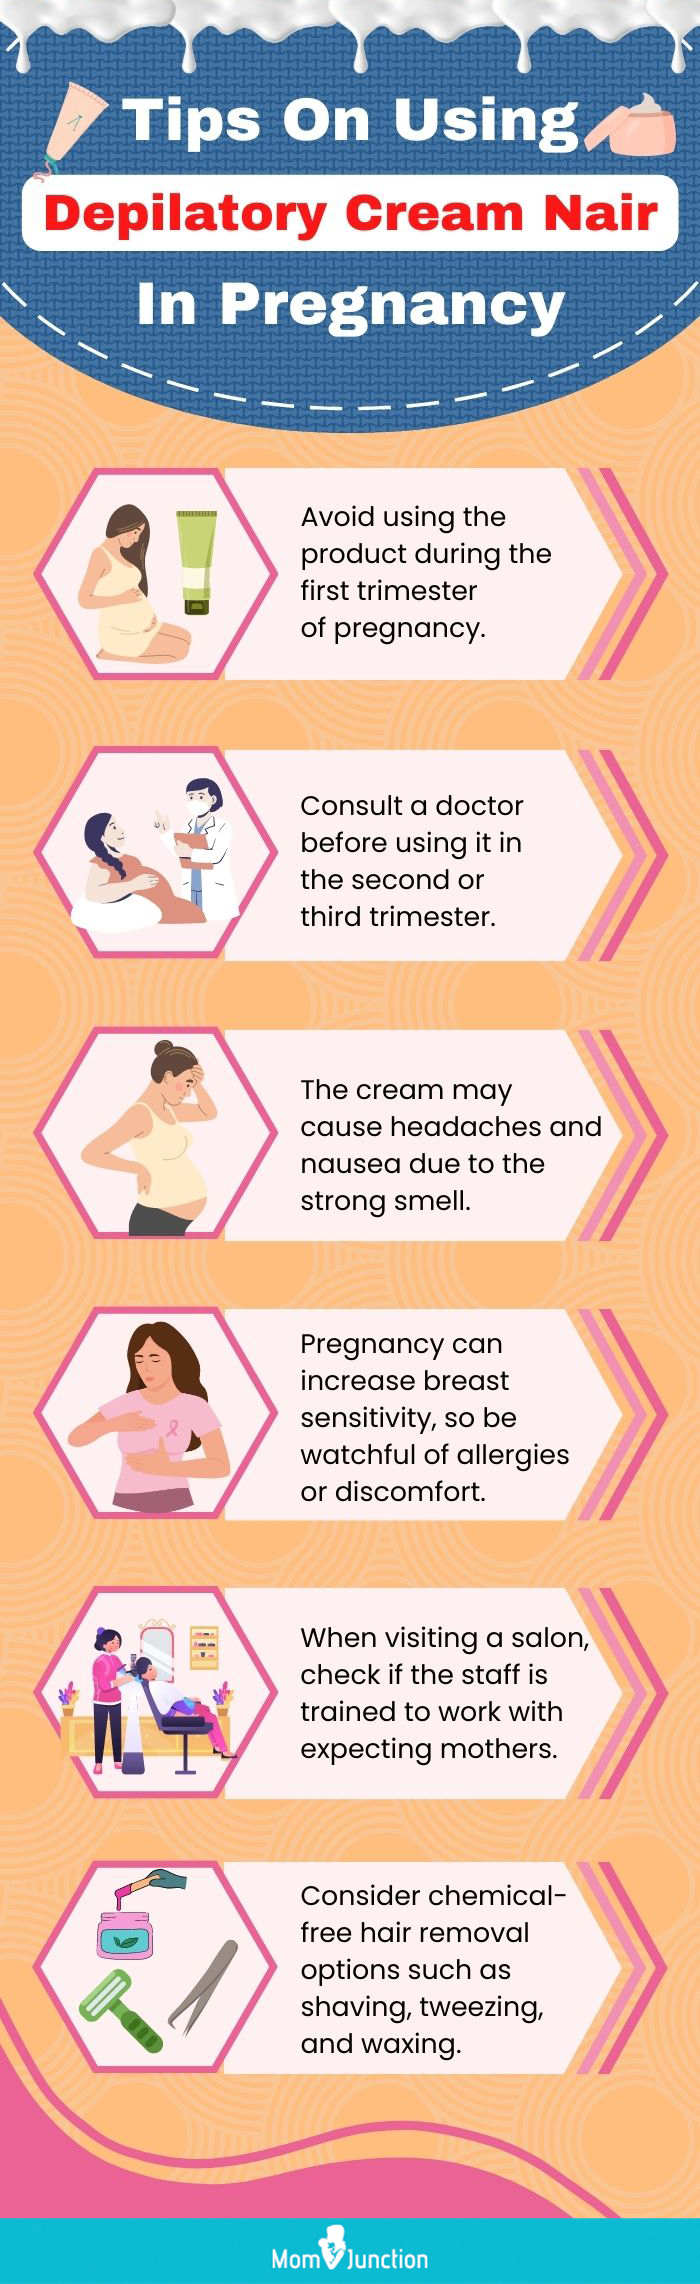 tips on using depilatory cream nair in pregnancy (infographic)